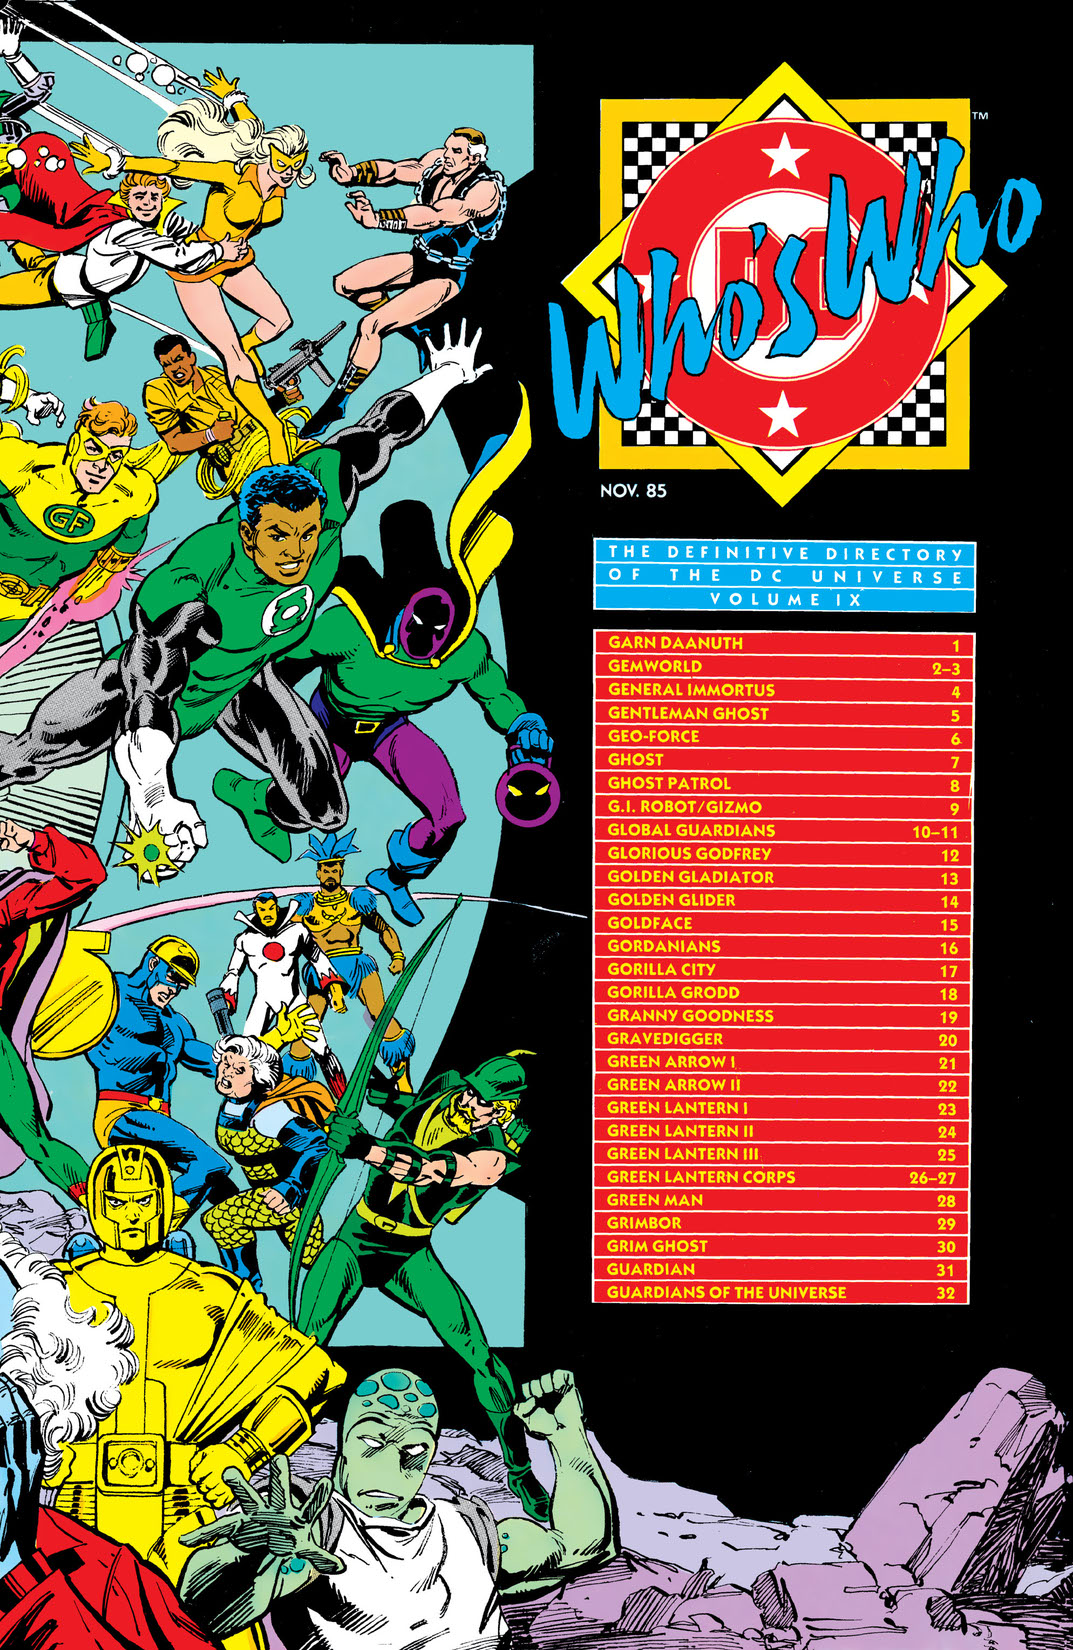 Who's Who: The Definitive Directory of the DC Universe #9 preview images